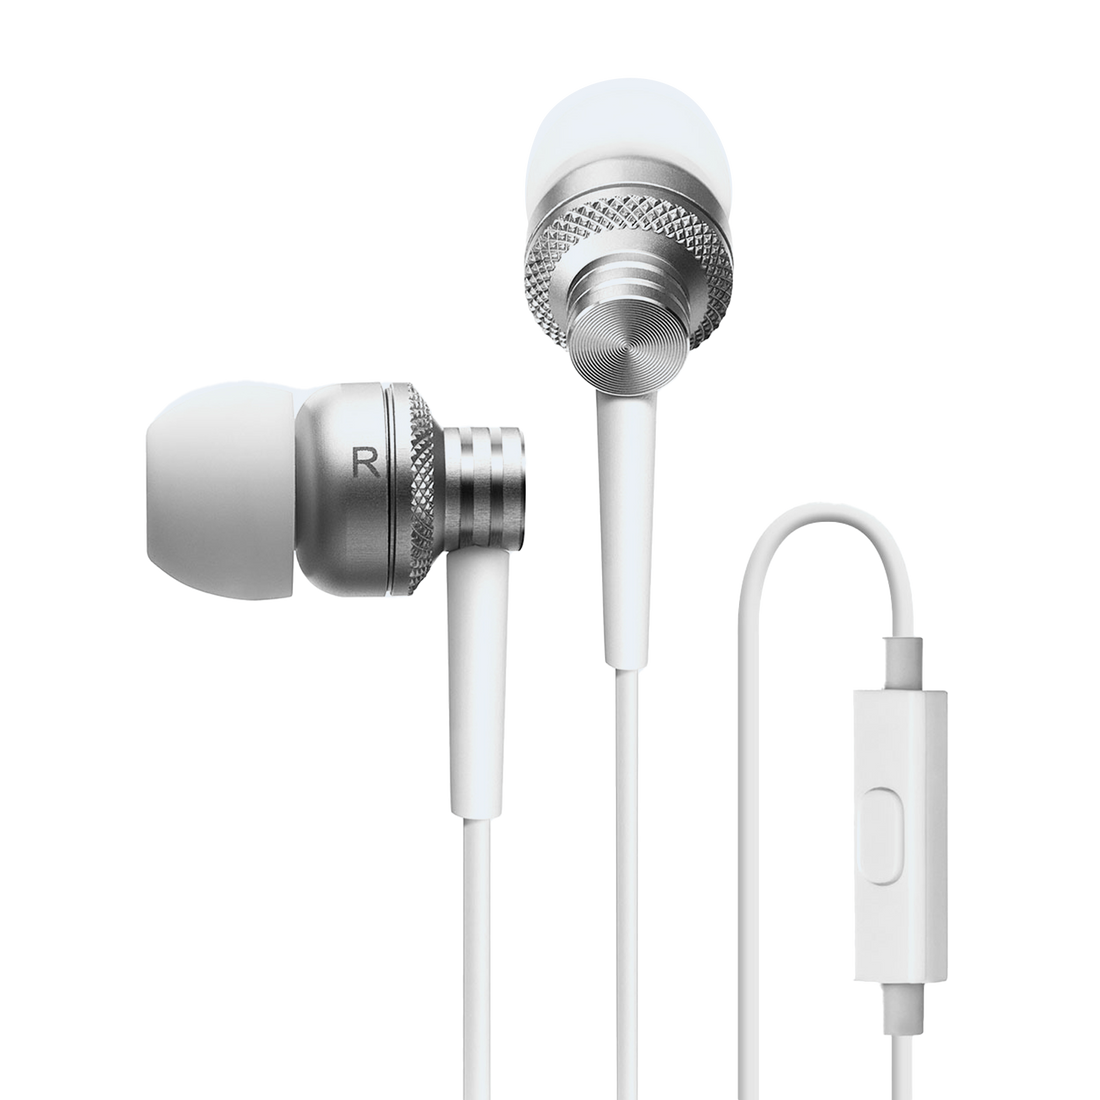 P270 Stylish Hi-Fi earphone effortlessly lets you take calls on the go